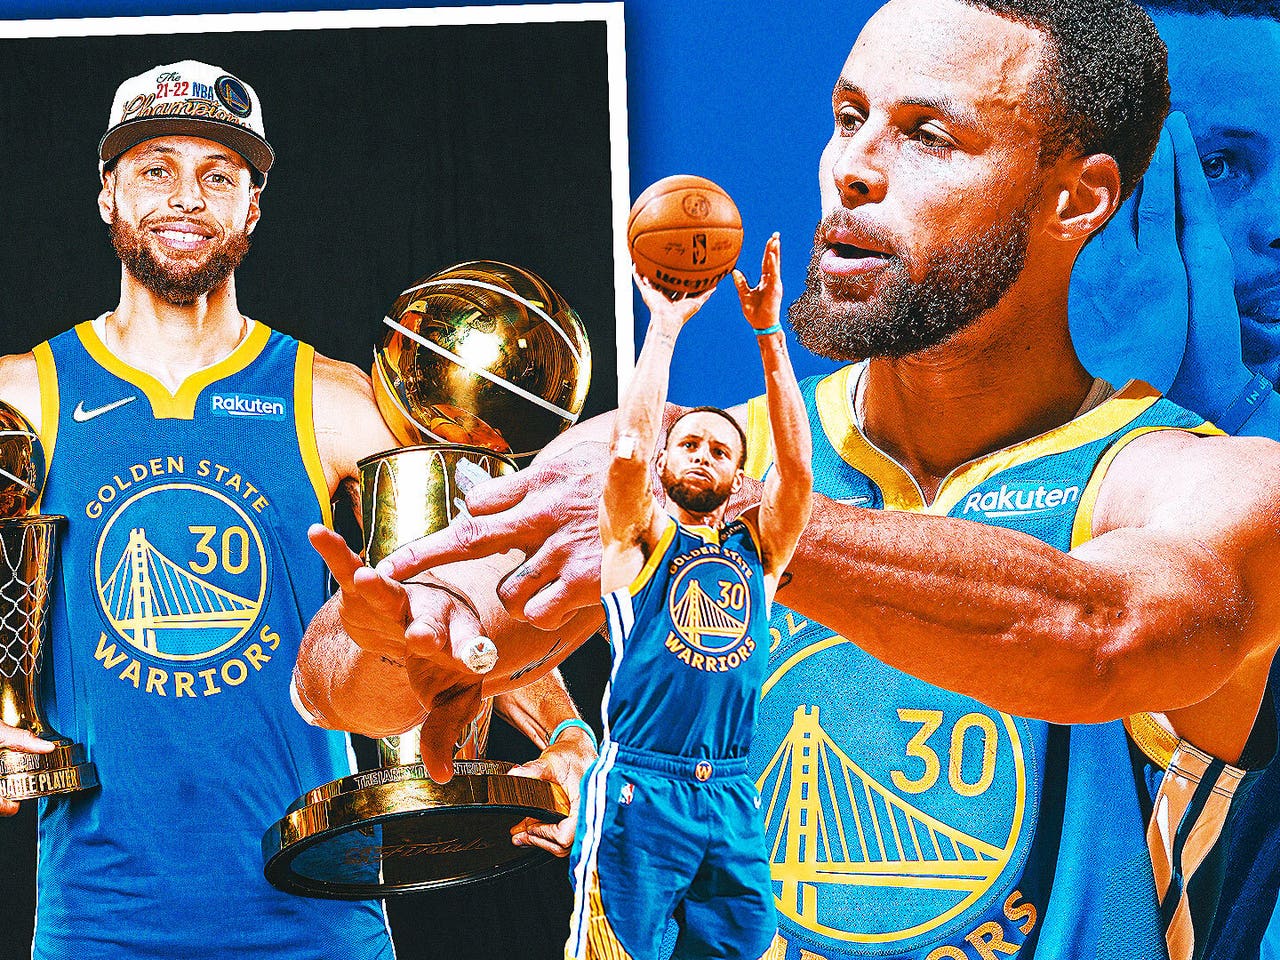 Stephen Curry wins 2022 Finals MVP: What does it mean for his legacy?